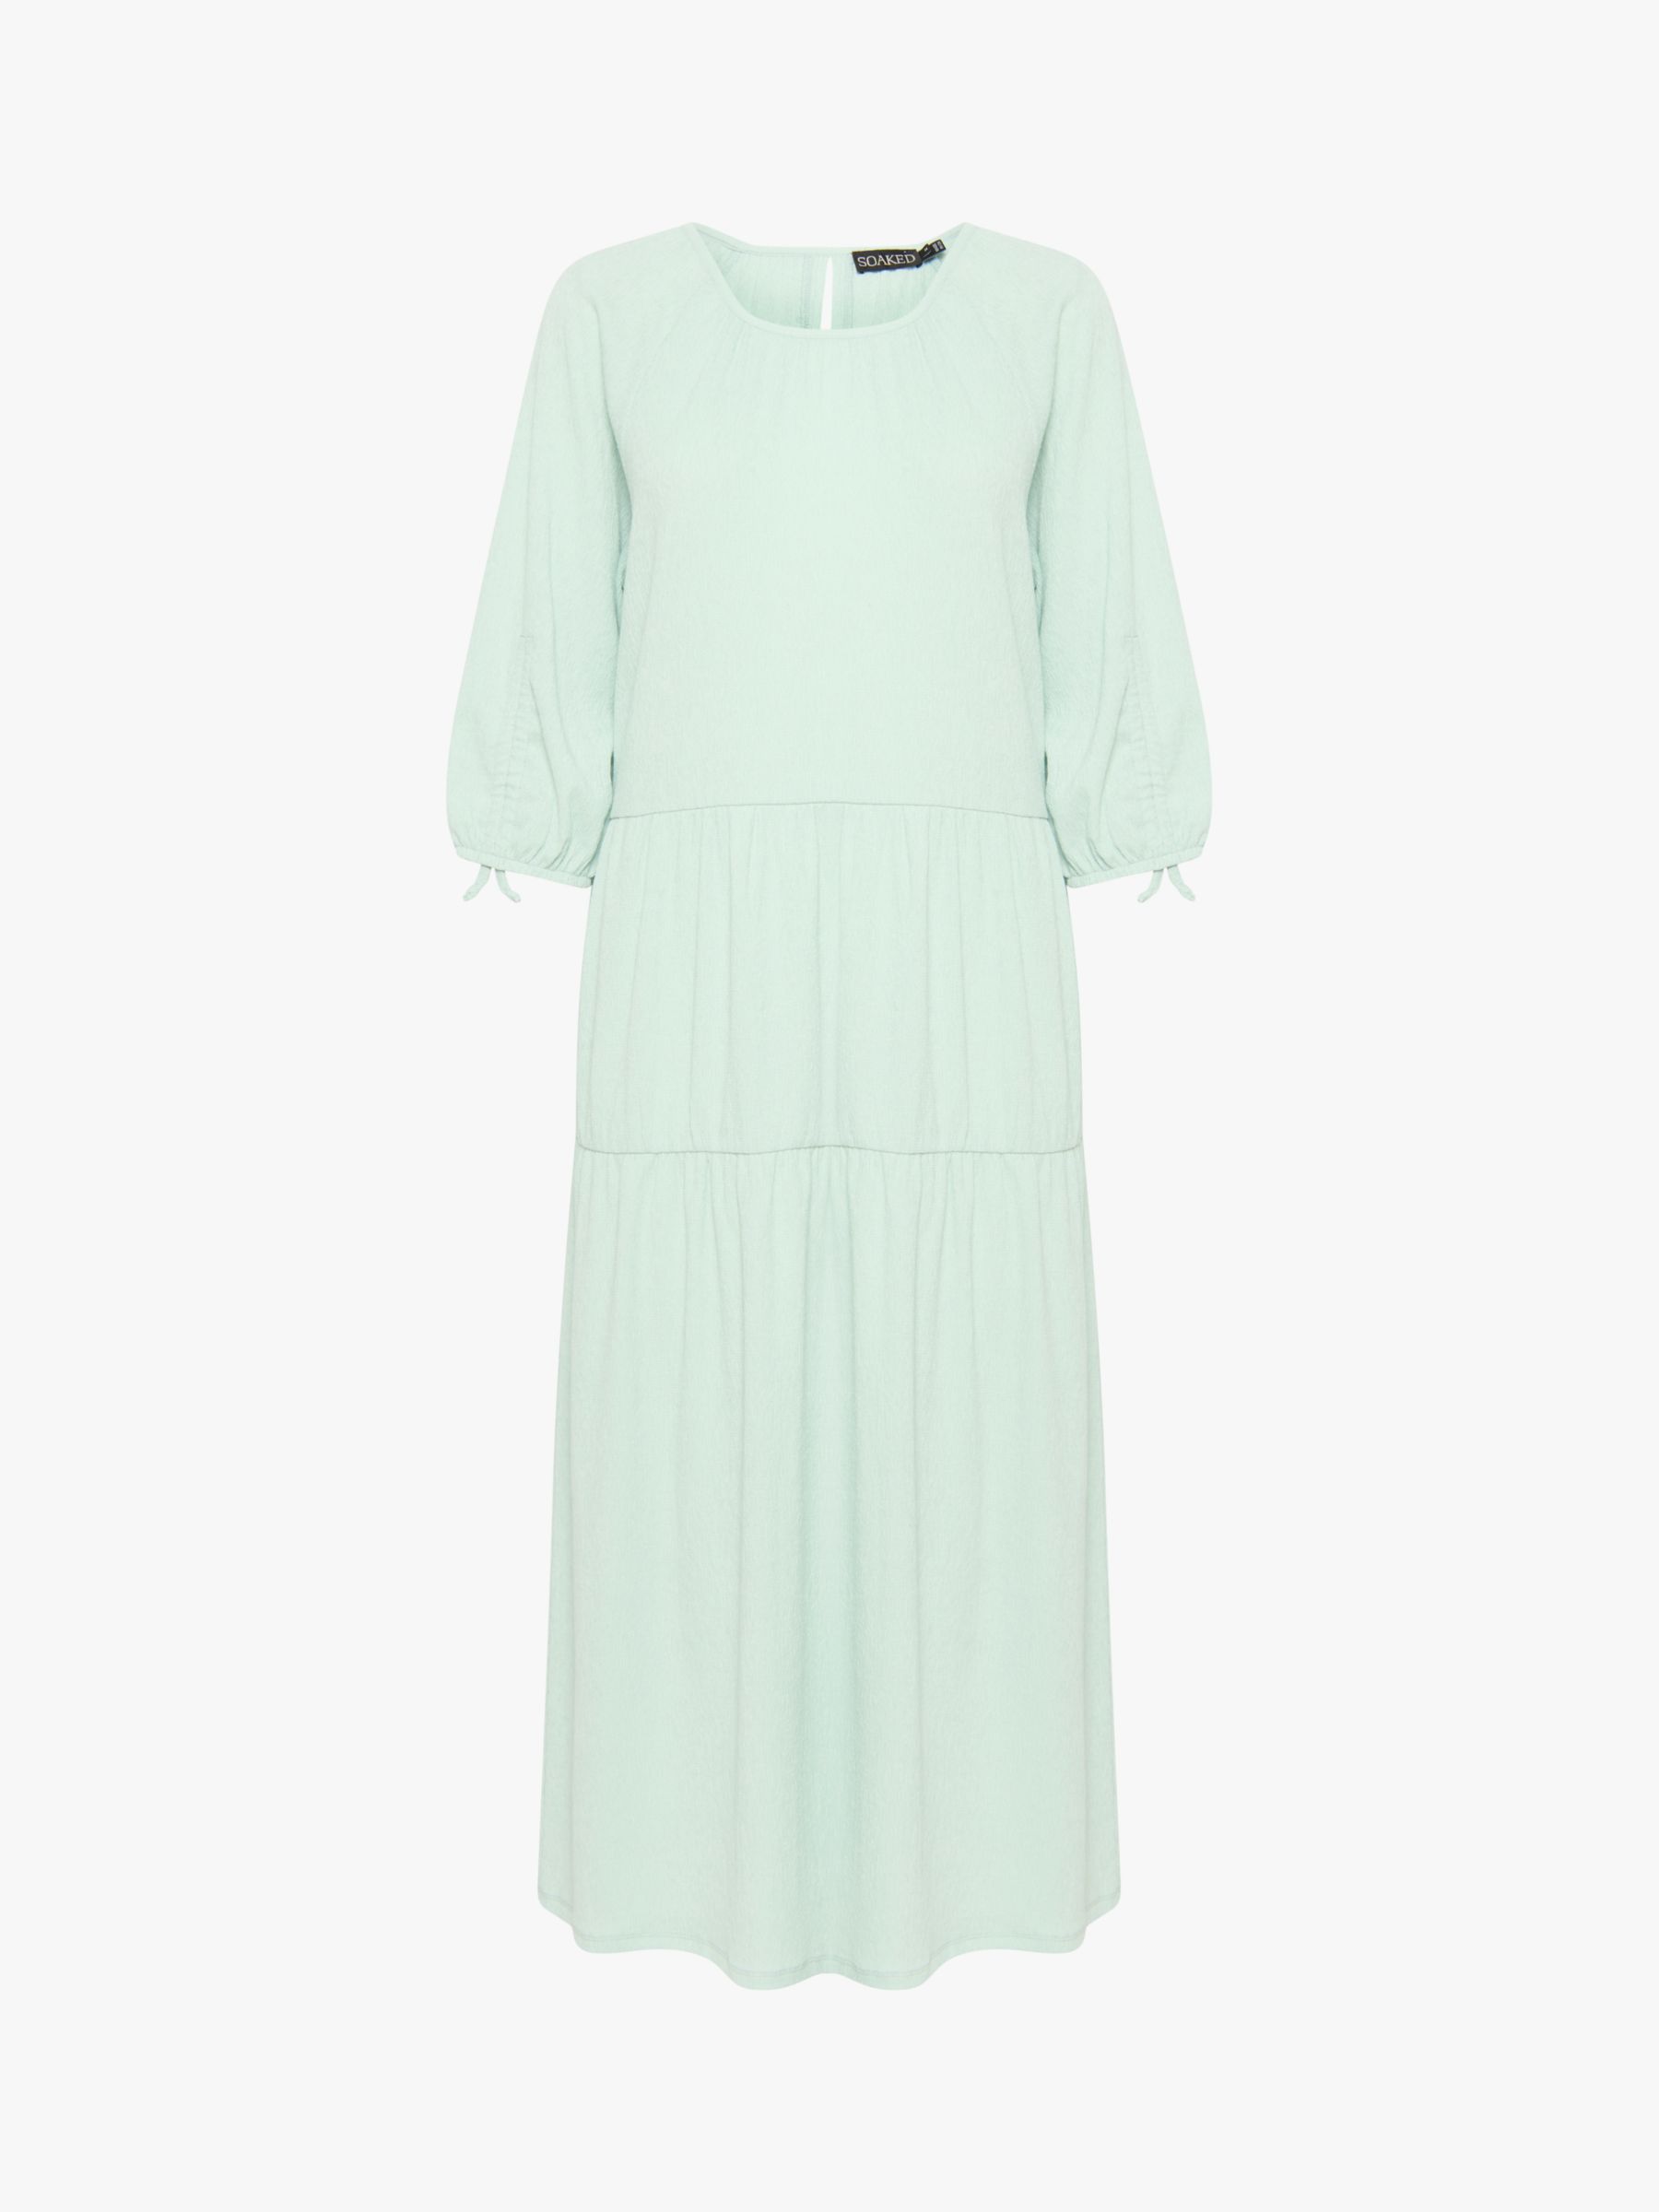 Buy Soaked In Luxury Catharina Tiered Maxi Dress, Surf Spray Online at johnlewis.com